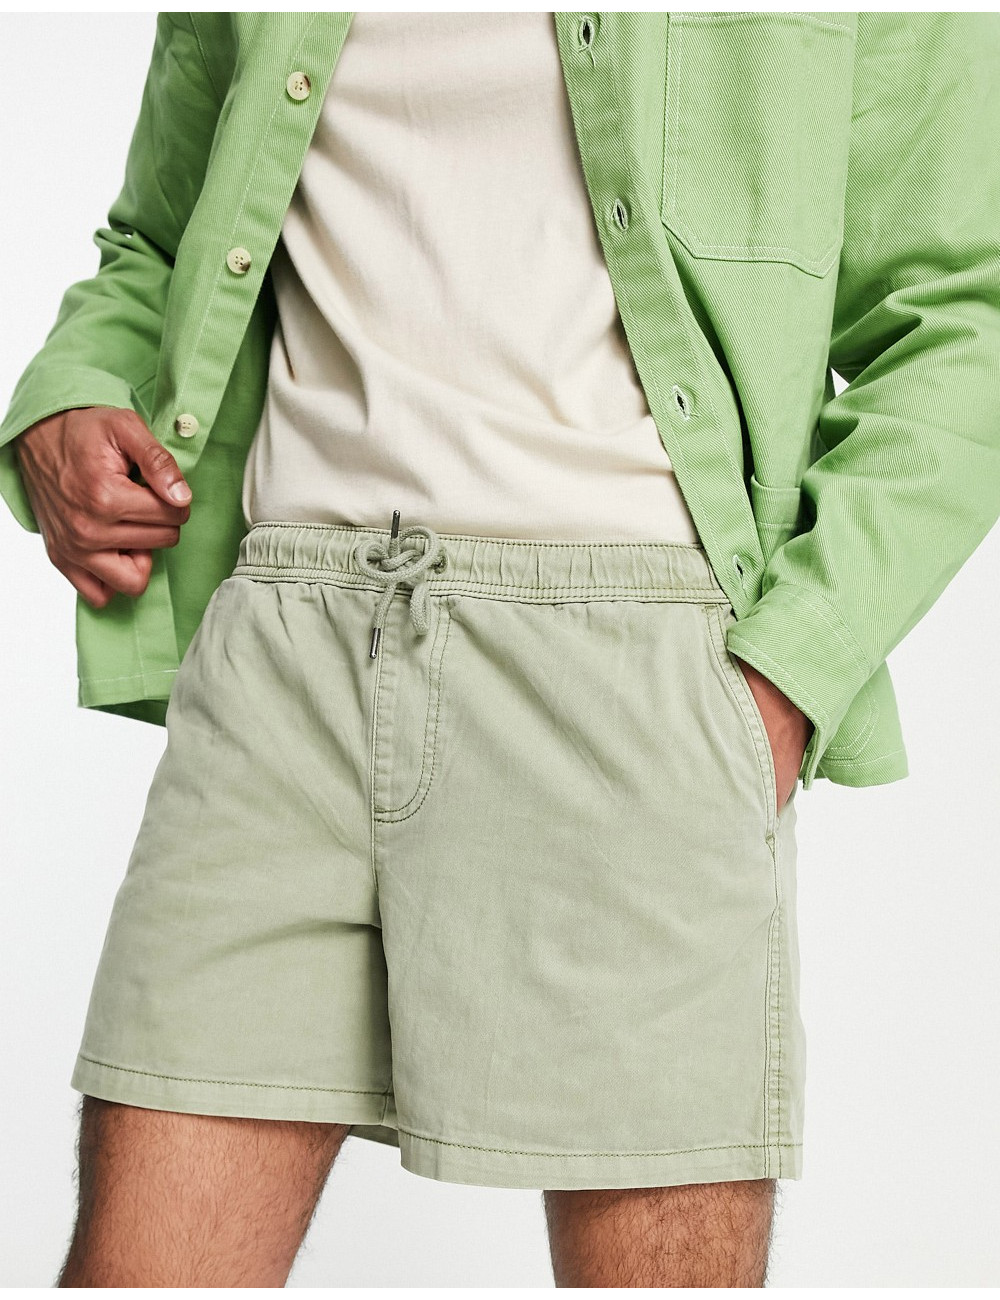 New Look pull on shorts in...